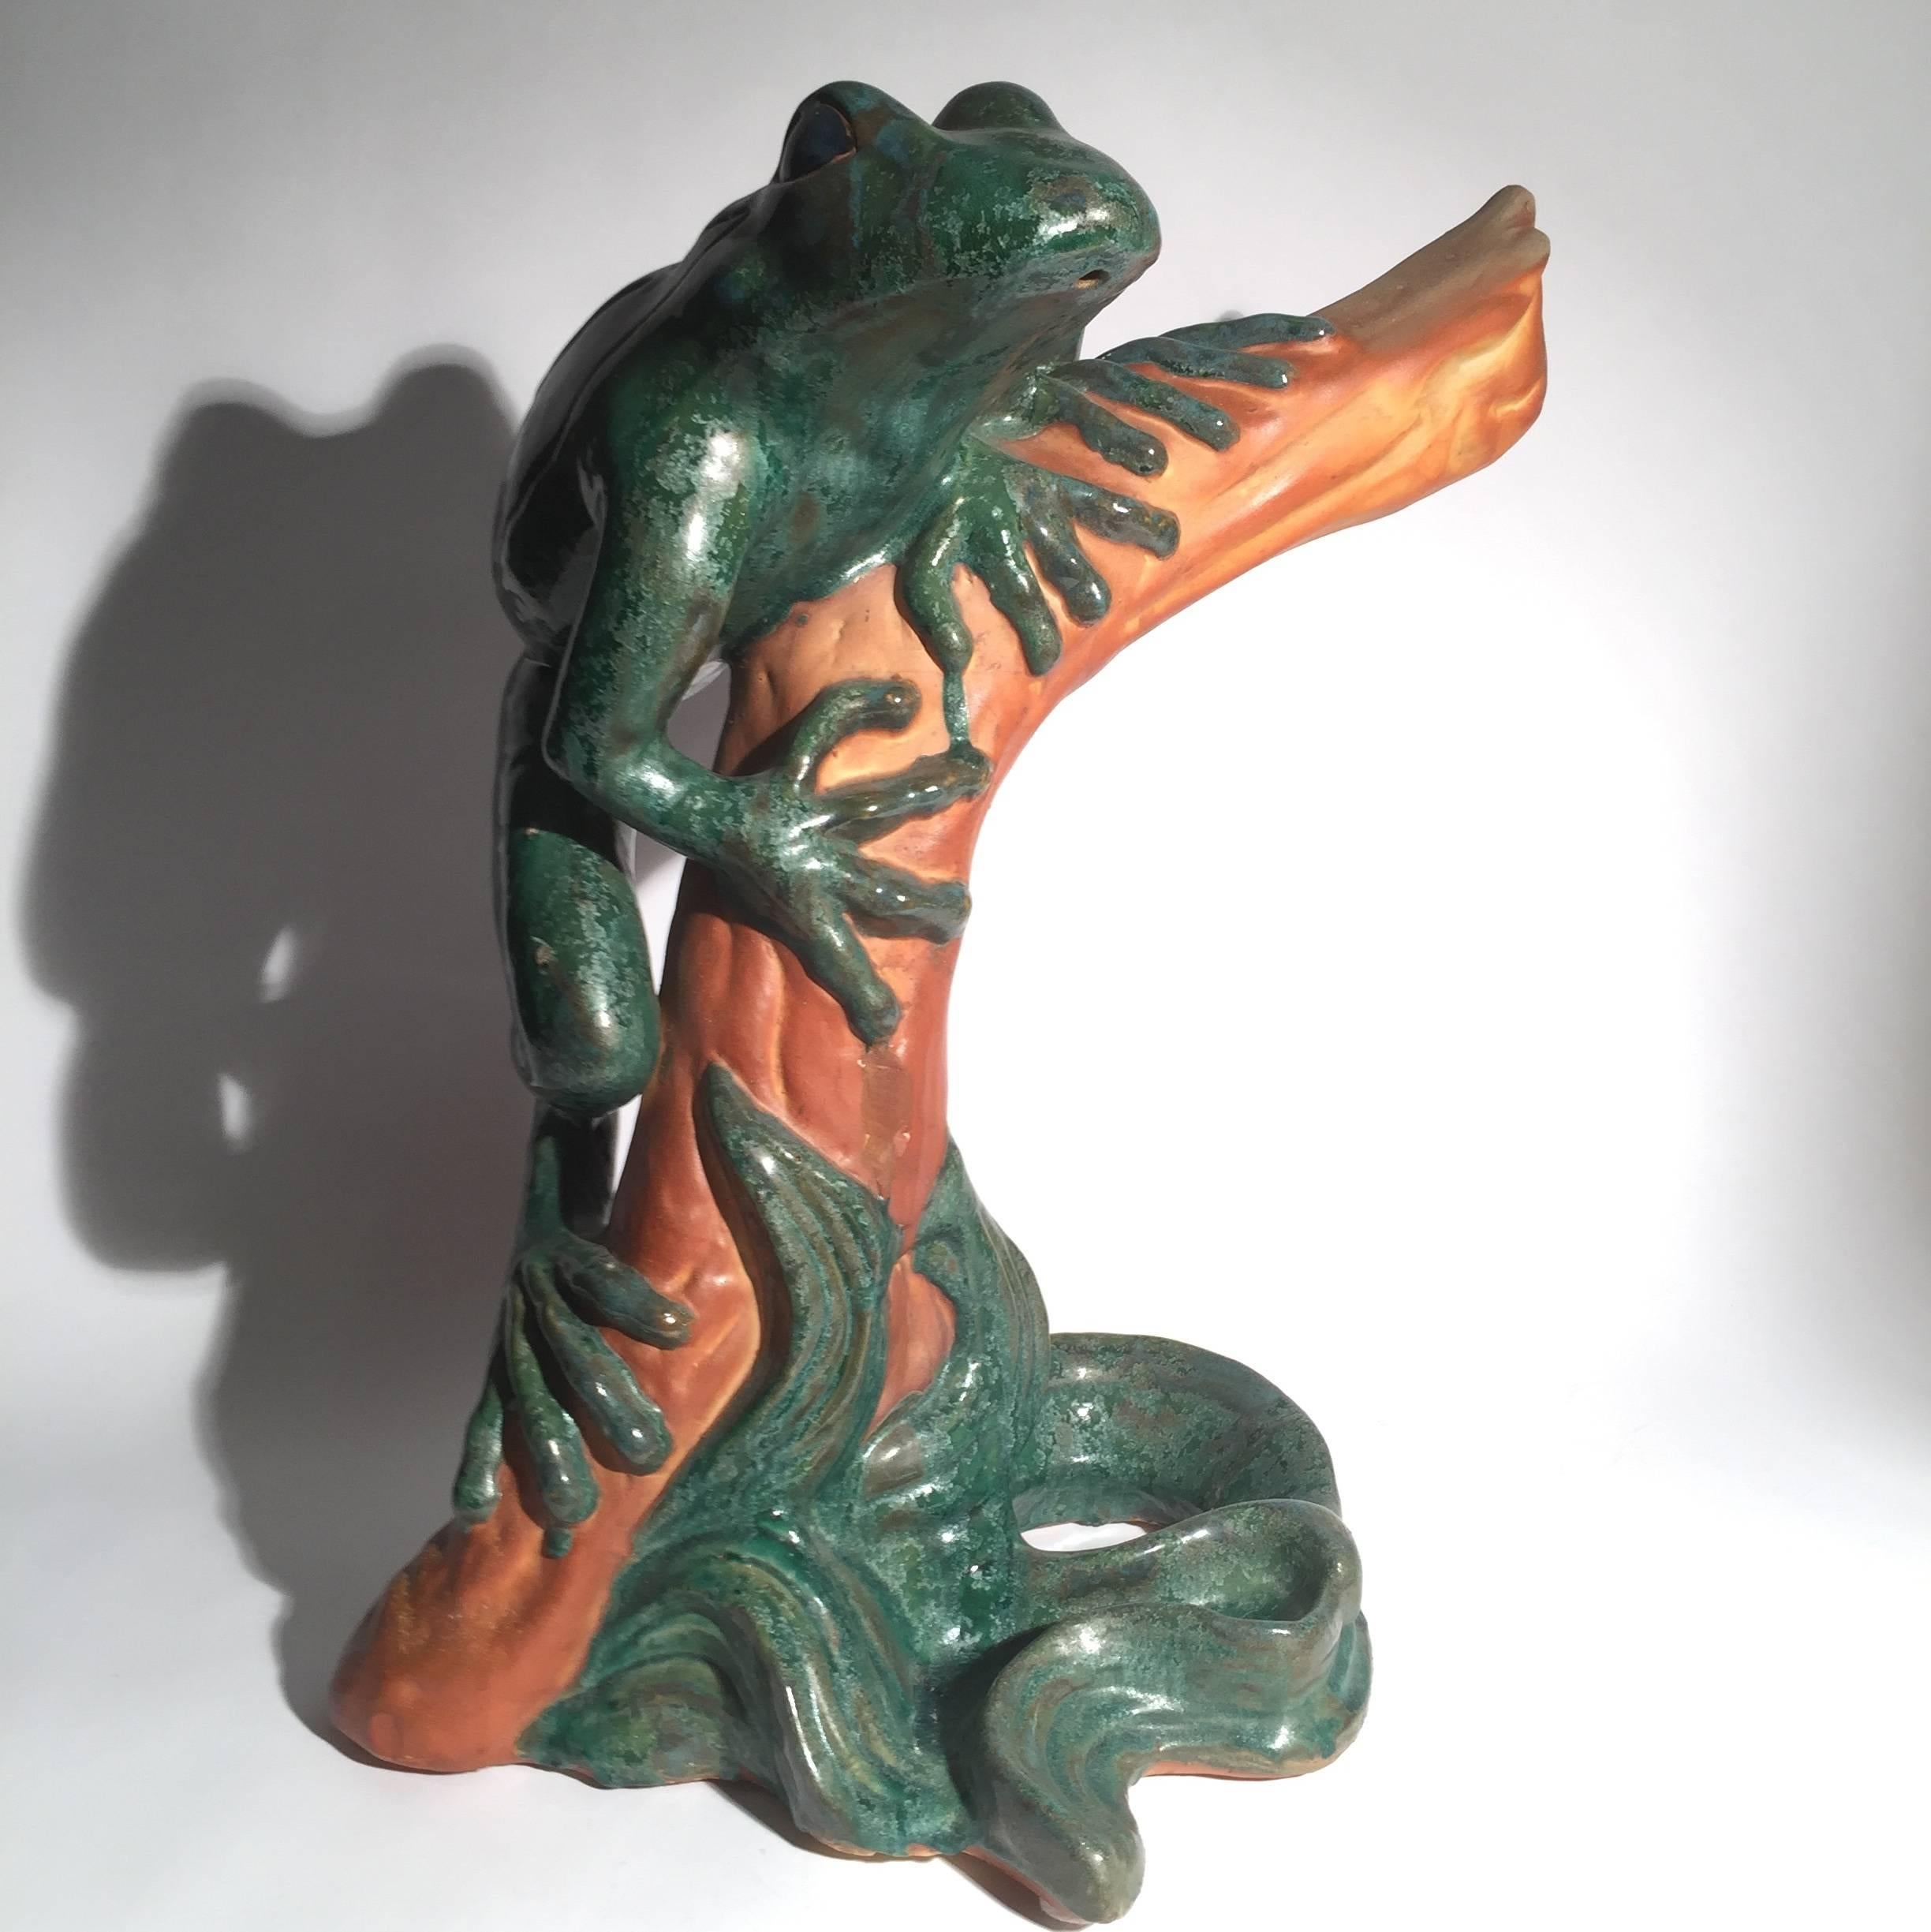 Large Whimsical Midcentury Faience Sculpture of a Frog 1